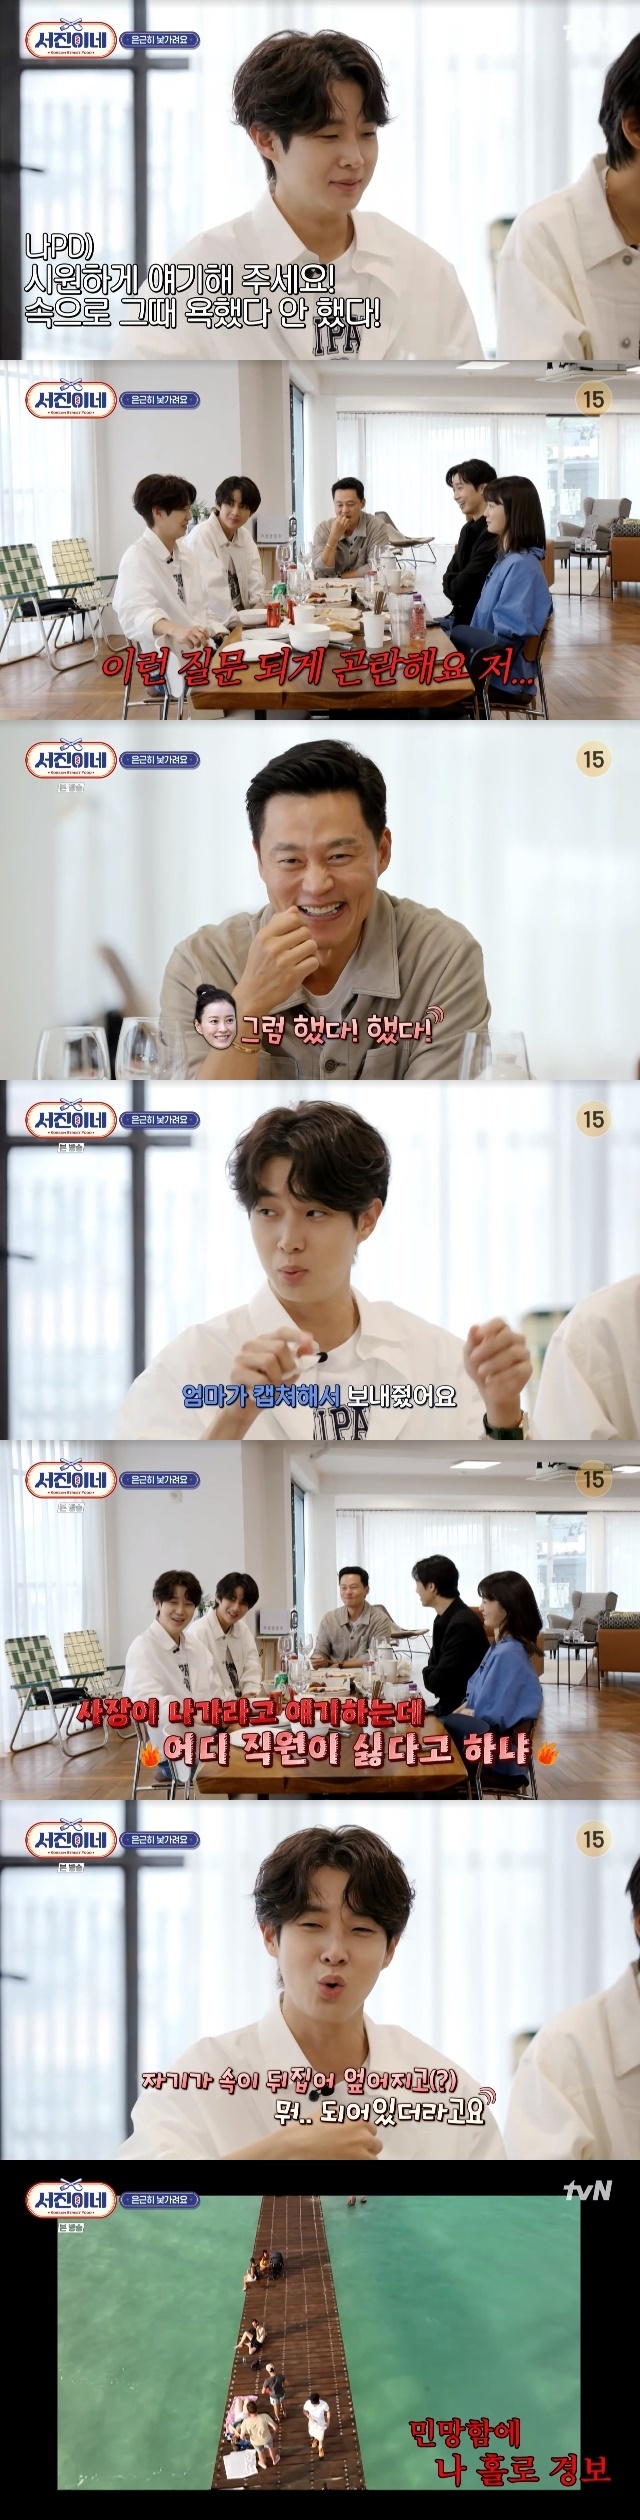 Actor Choi Woo-shik confessed that he had confirmed the reaction of the netizen through his mother.TVN entertainment broadcasted on May 5 Seo-jin! In the 11th session, employees gathered in Korea for a dinner after the end of the business unveiled Vic-Fezensac Behind.Choi Woo-shik, who has been an insider throughout Vic-Fezensac, affirmed when asked if the term MBTI I (introverted) was true, saying that he was trying very hard.Choi Woo-shik added, Because you have a boss again. Na Young-seok PD and Park Seo-joon burst into bread saying (Lee Seo-jin) is watching from behind and thrashing.Lee Seo-jin said, Its not a rough style. You have to think about ordering in the hall. Its hard.(Choi Woo-shik) has a sensitive personality. It was not uncommon to wrap Choi Woo-shik, but Na Young-seok PD said, What if I told you to go out to fly the flyer? At the time of Vic-Fezensac, Choi Woo-shik desperately refused, but Lee Seo-jin was pushed back to turn the flyer.Choi Woo-shik said, At that time, I think the expression is insulting inside.Na Young-seok PDs question, Did you blame me? Jung Yu-mi replied, I am so sorry for this question.